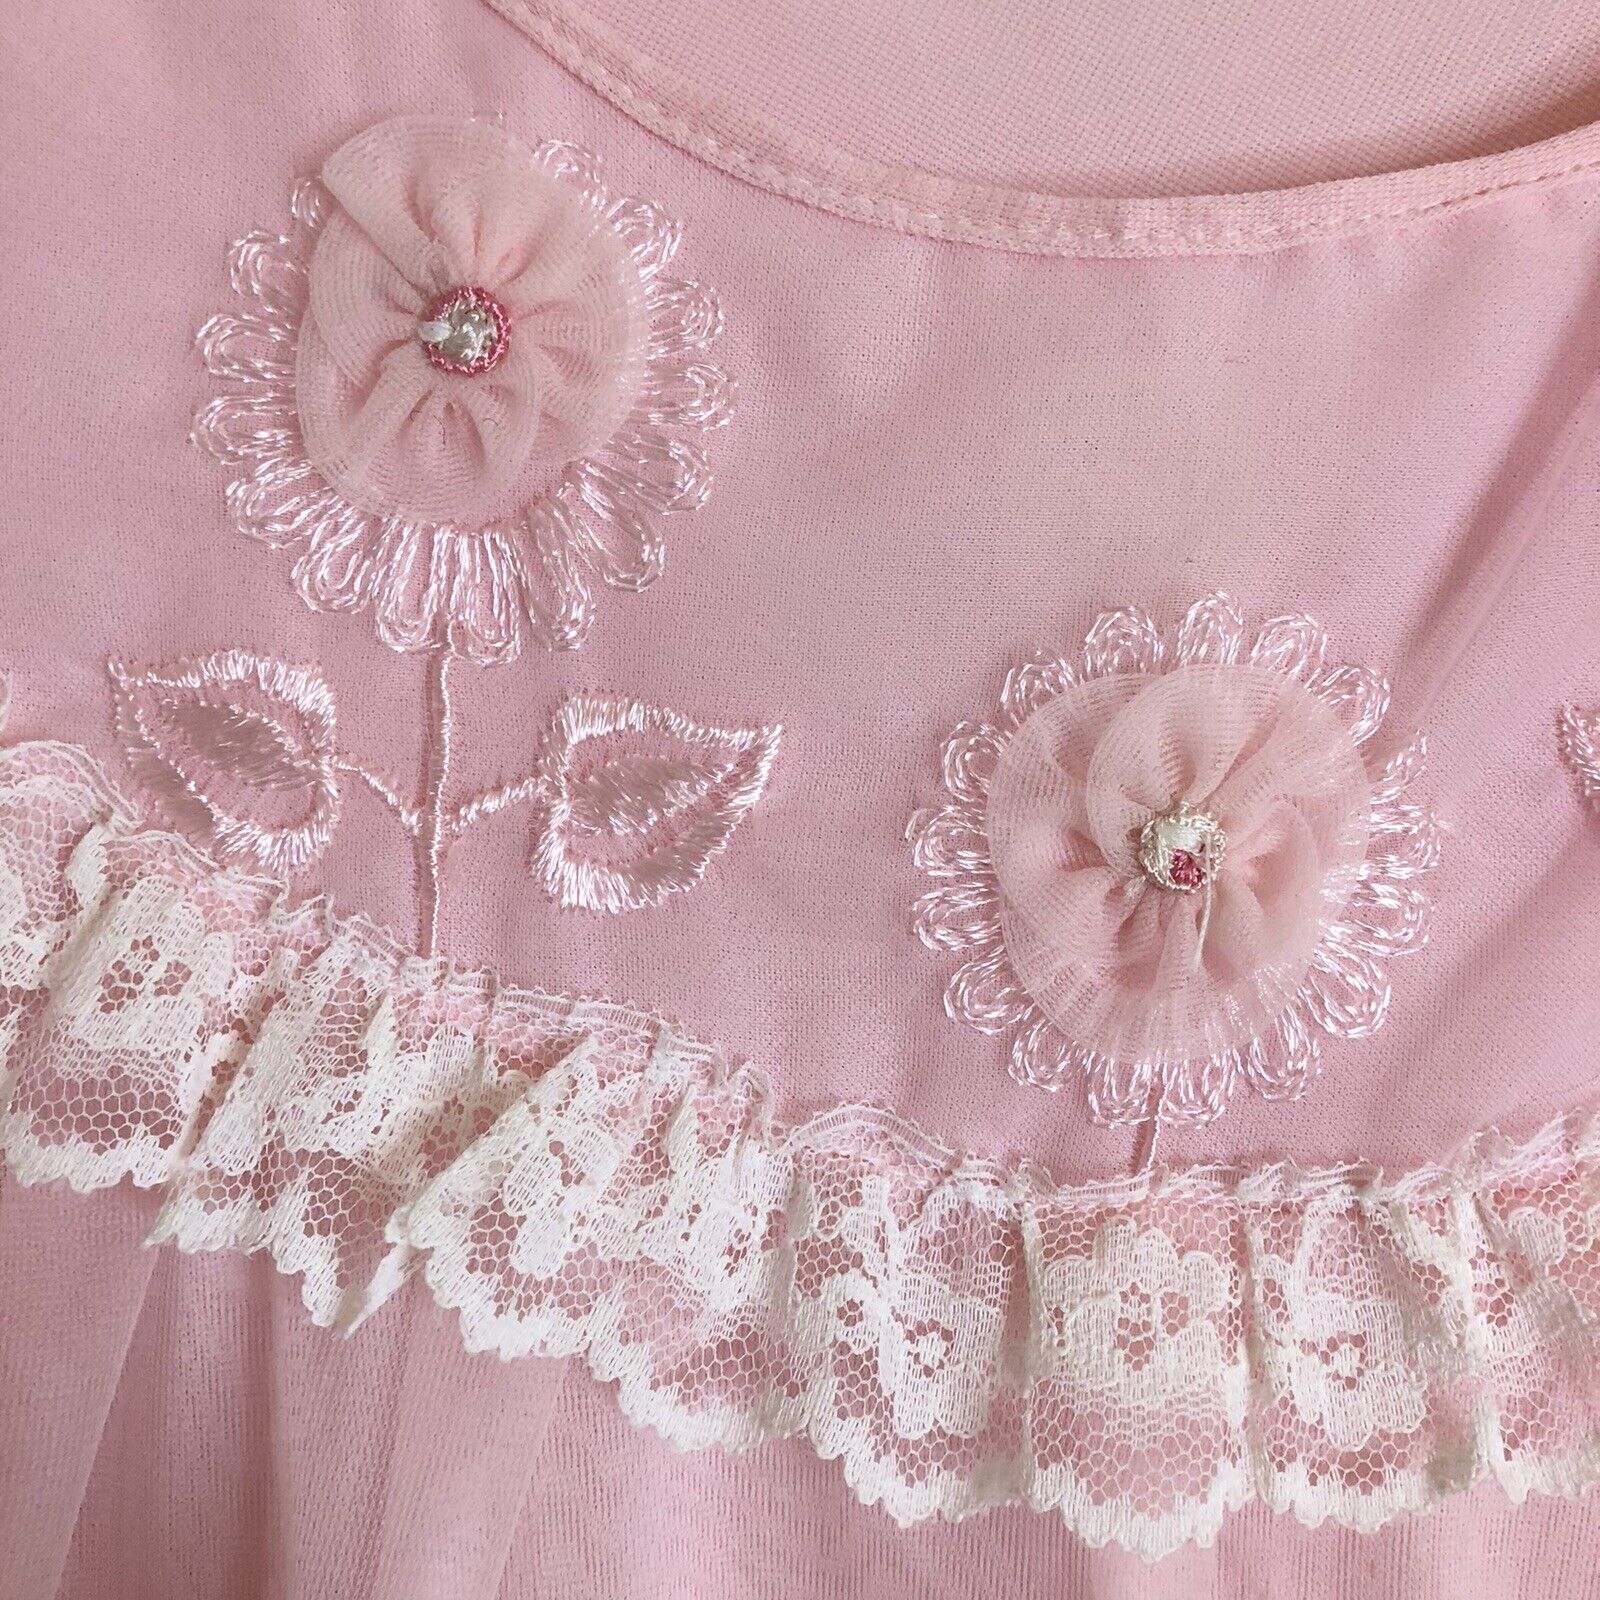 Vintage Babydoll Nightie Nightgown 1960s Size Med… - image 3